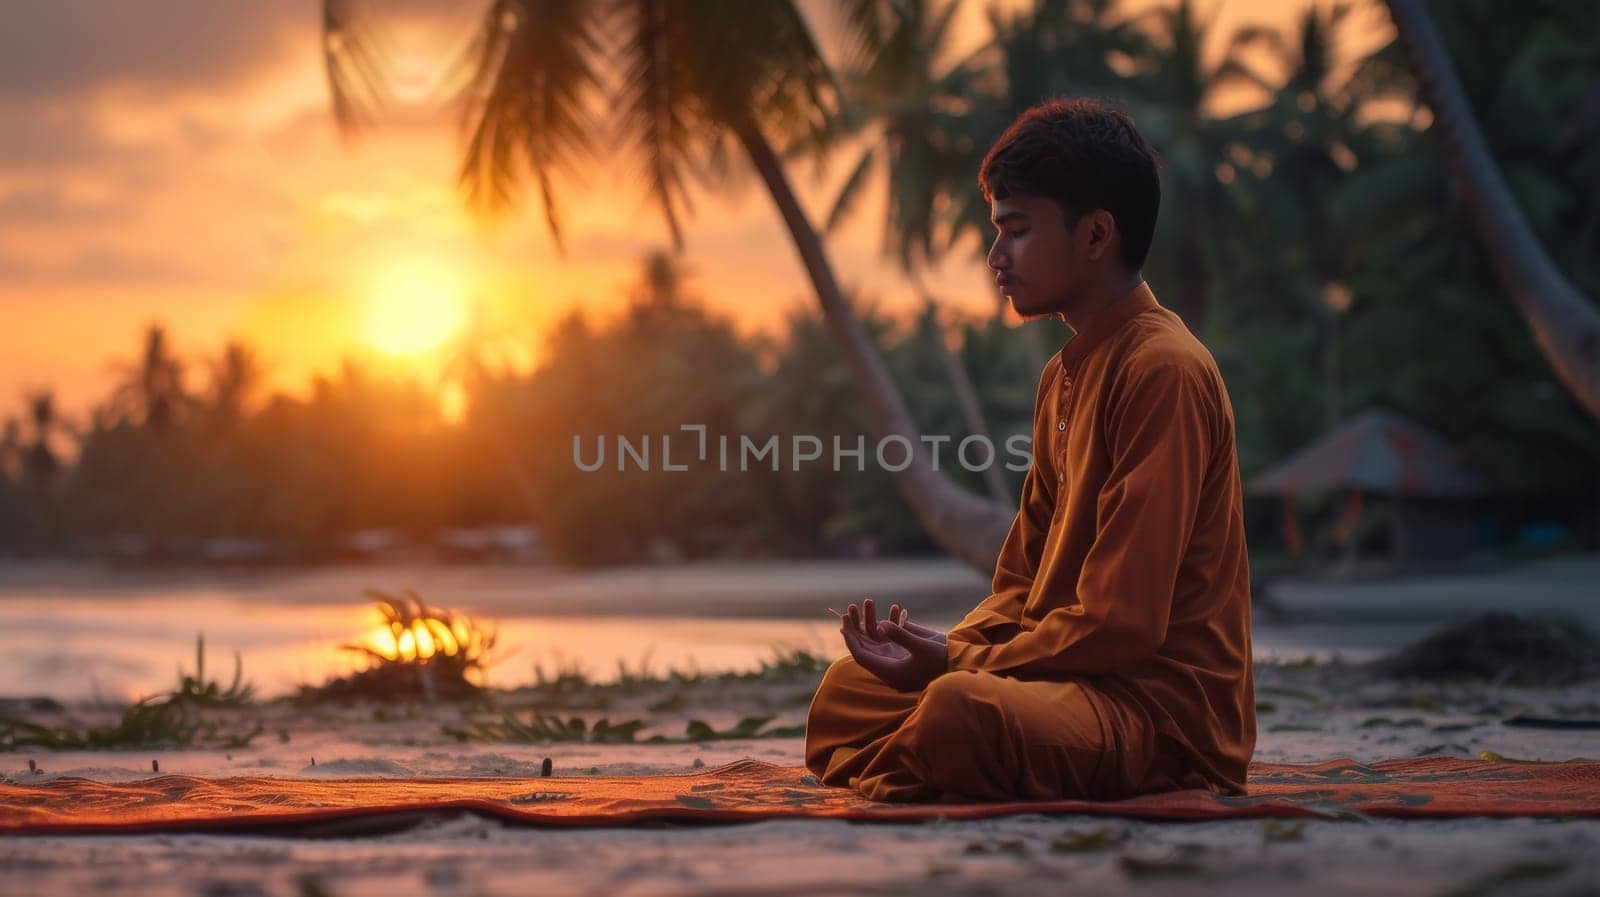 A young man sitting on the beach meditating in front of a sunset